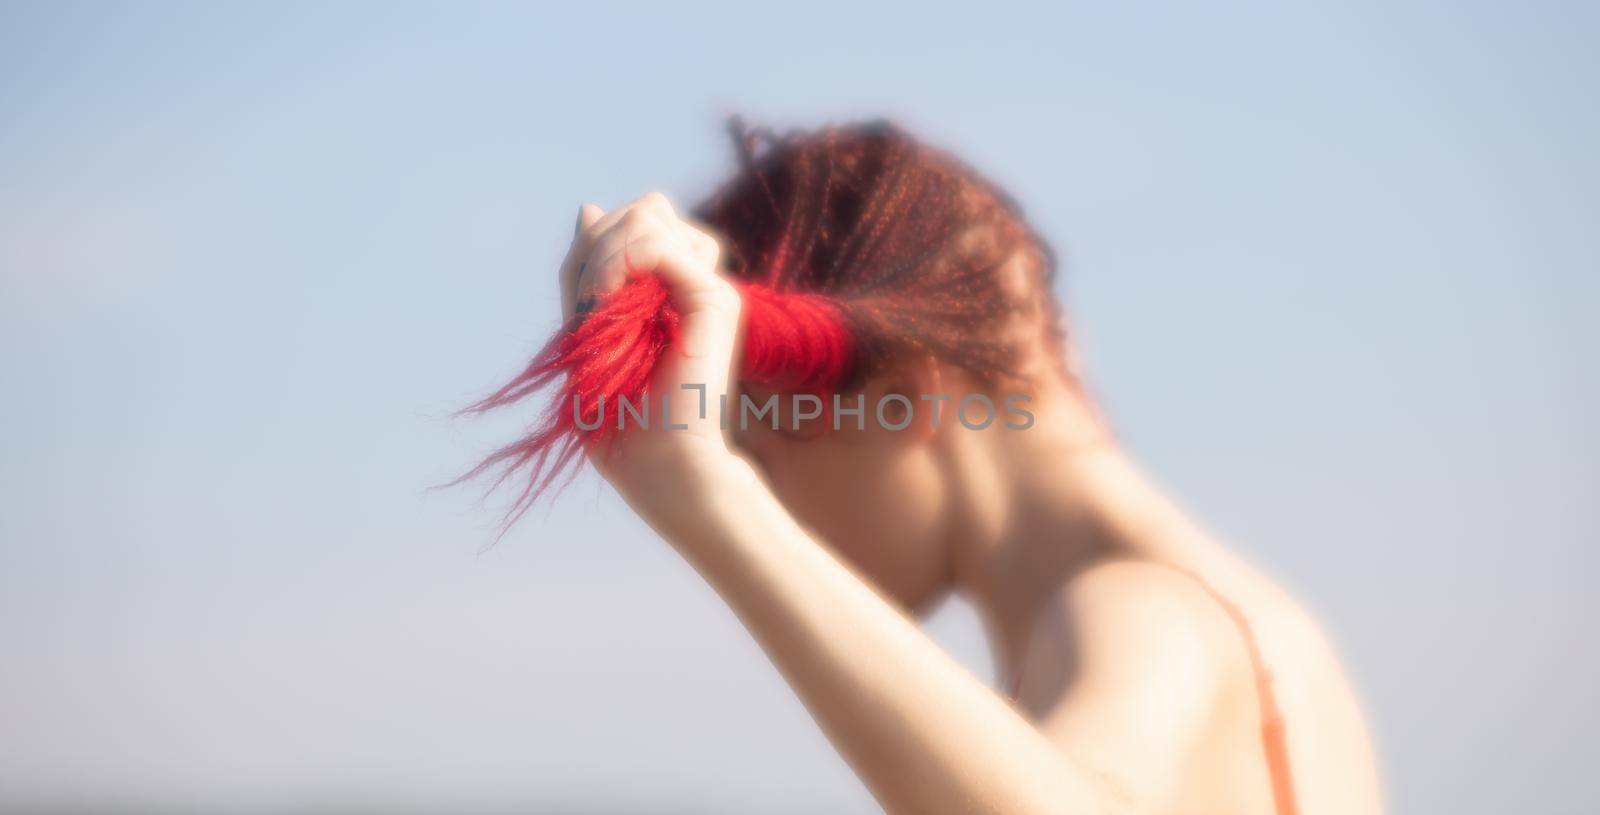 Soft focus blurred image of a beautiful young woman with scarlet dreadlocks and red bathing suit enjoying nature on the beach